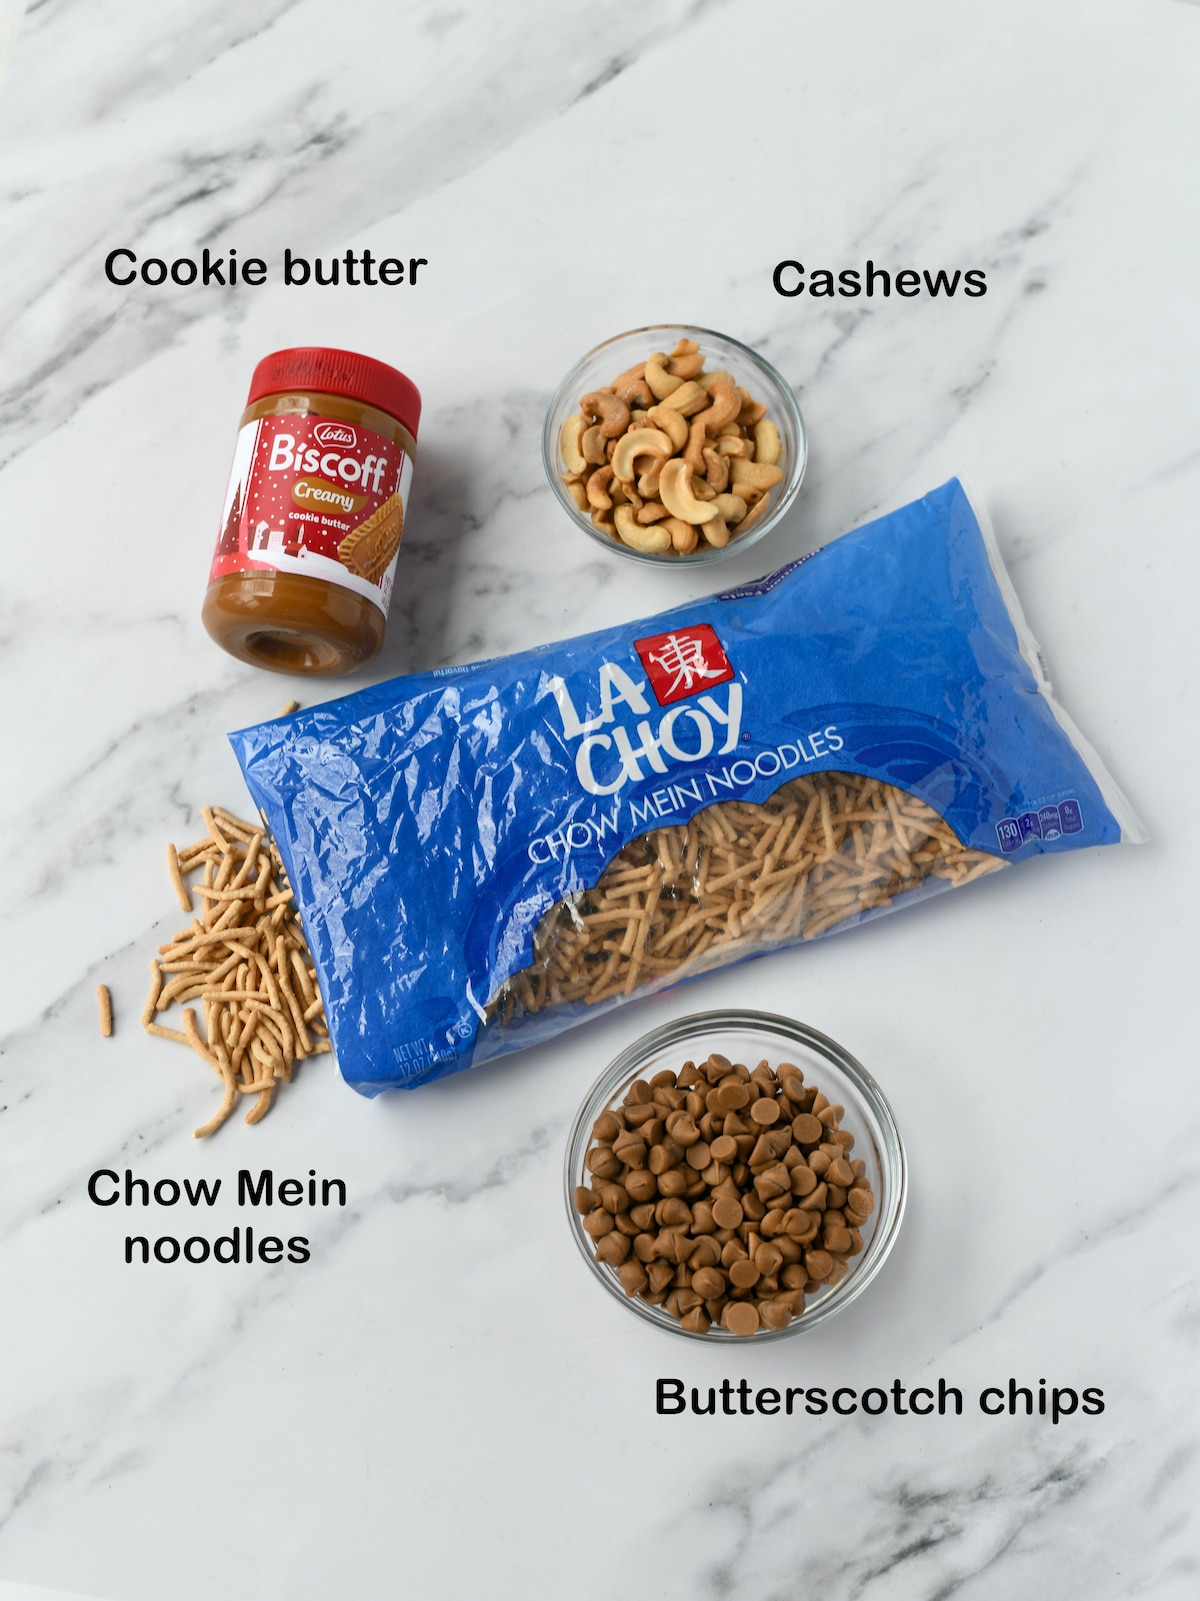 Ingredients for Cookie Butter Haystacks candy: chow mein noodles, Biscoff, cashews, butterscotch chips.
